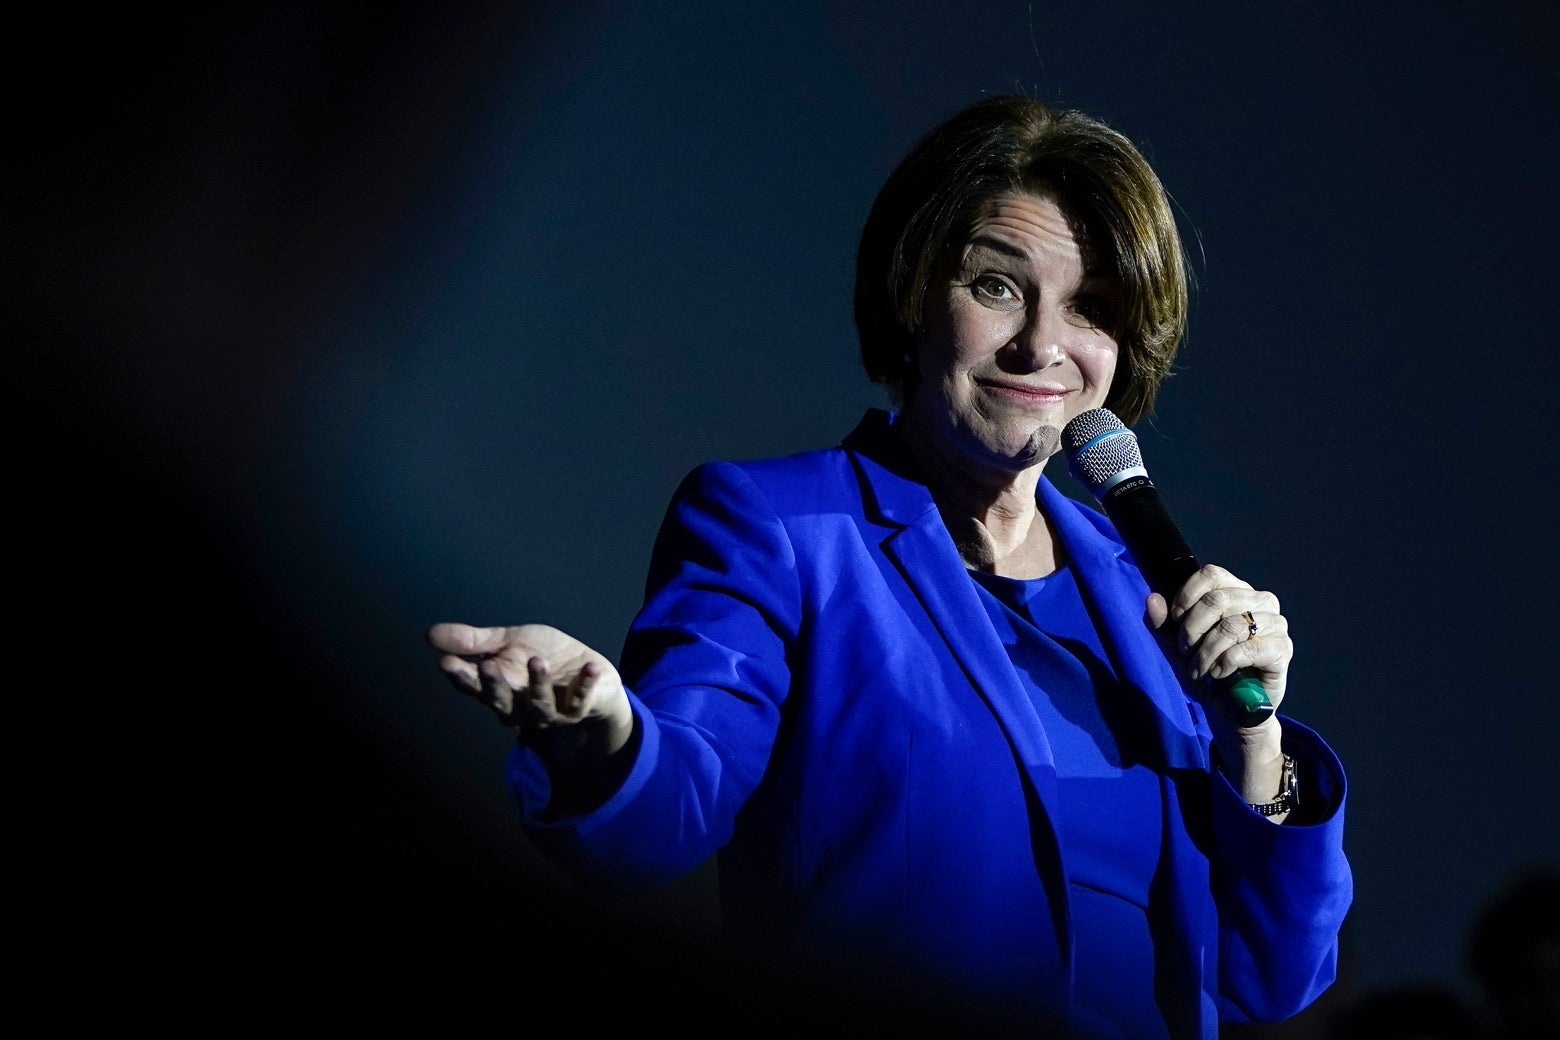 Amy Klobuchar speaks into the microphone in her left hand while gesturing with her right.